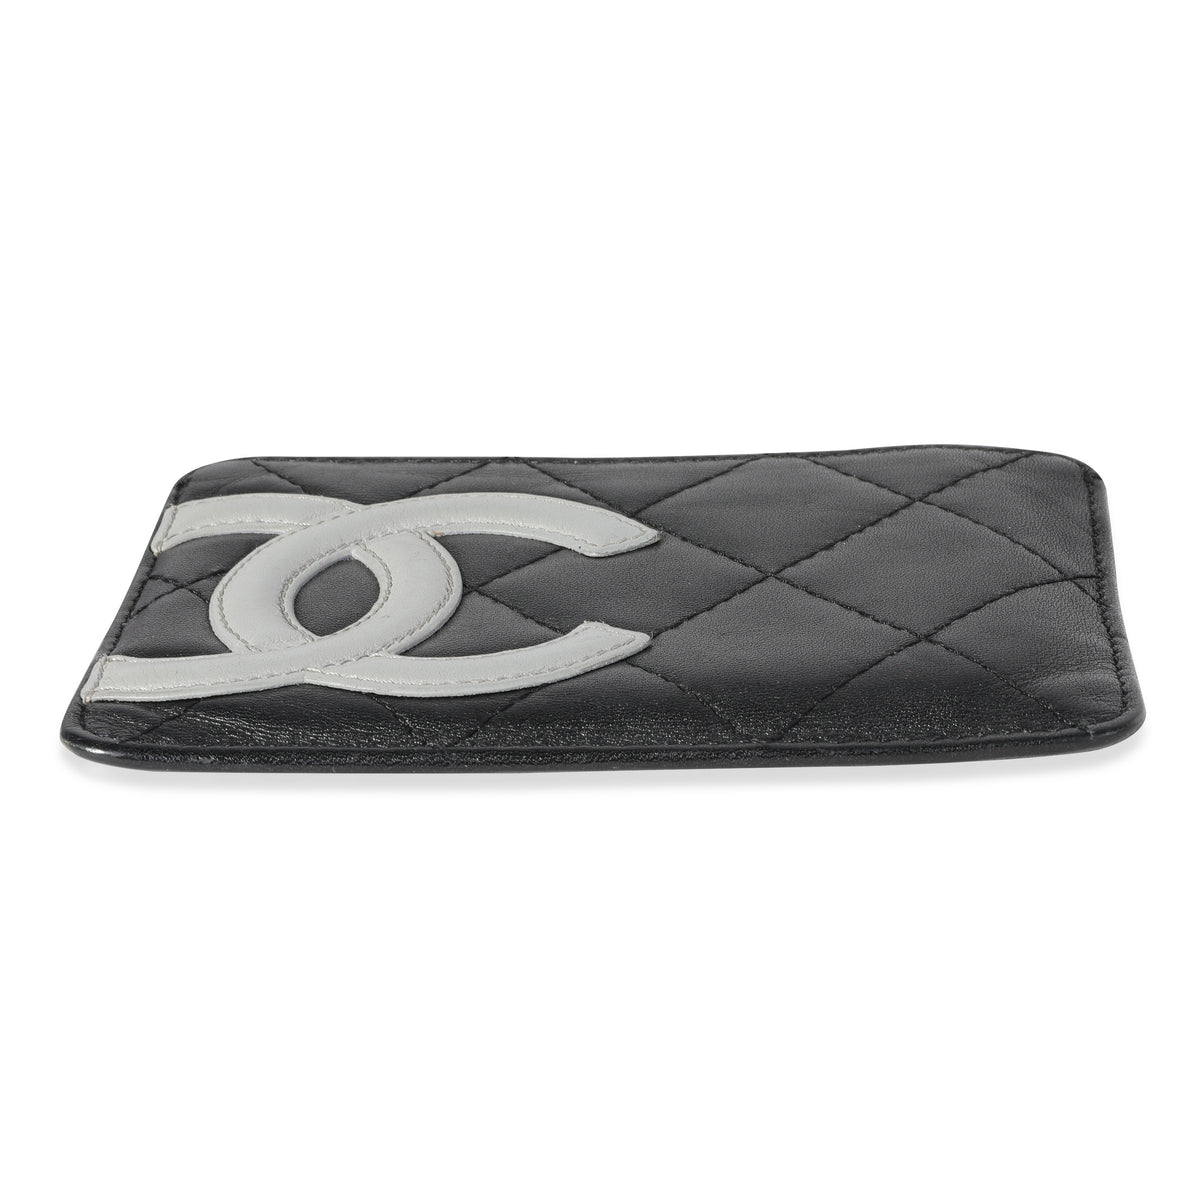 Chanel Black Quilted Lambskin Ligne Cambon Card Holder